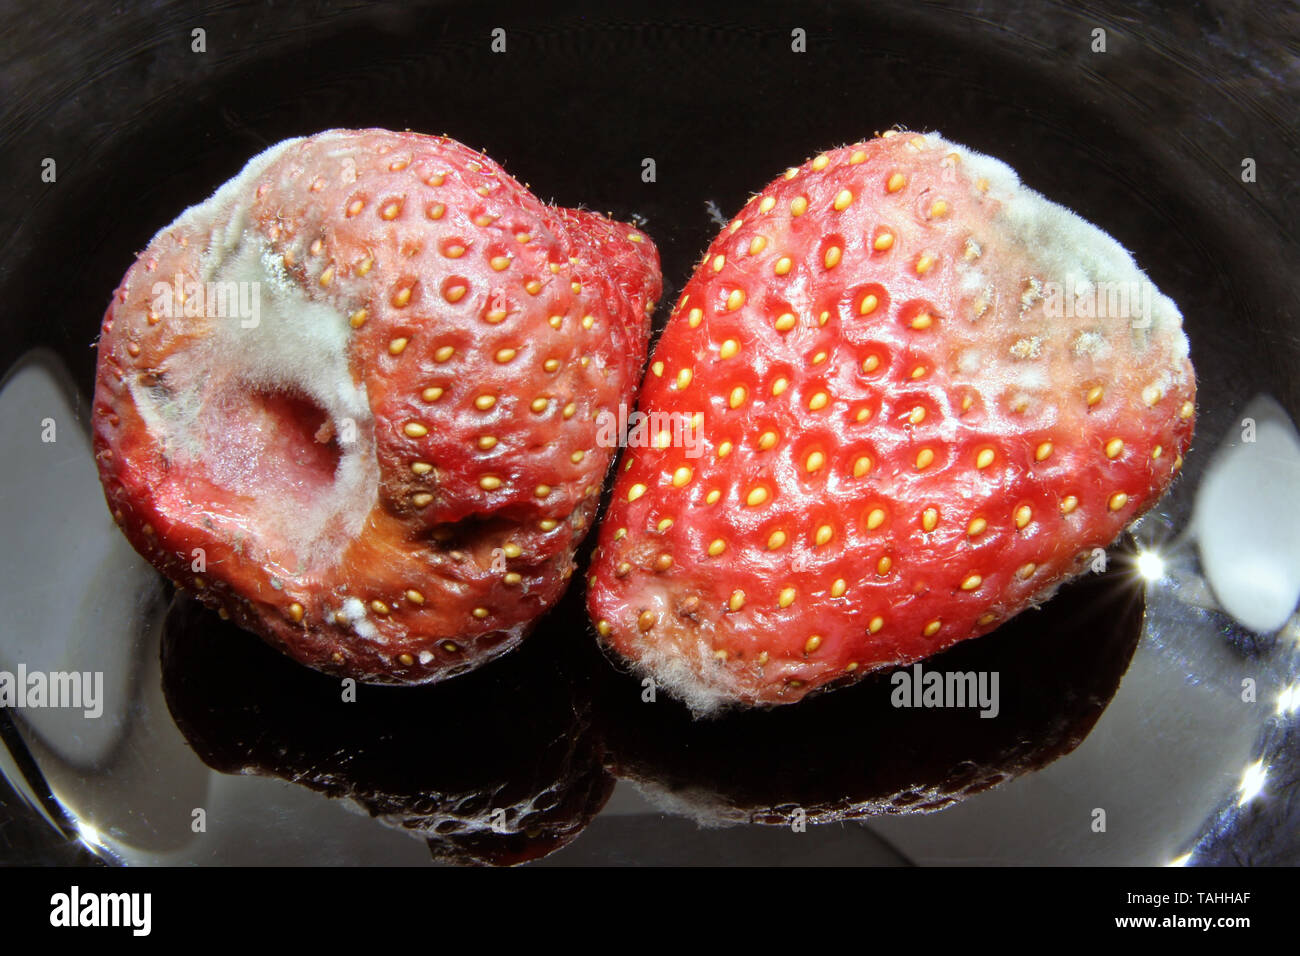 Strawberry covered with mould, composite image - Stock Image